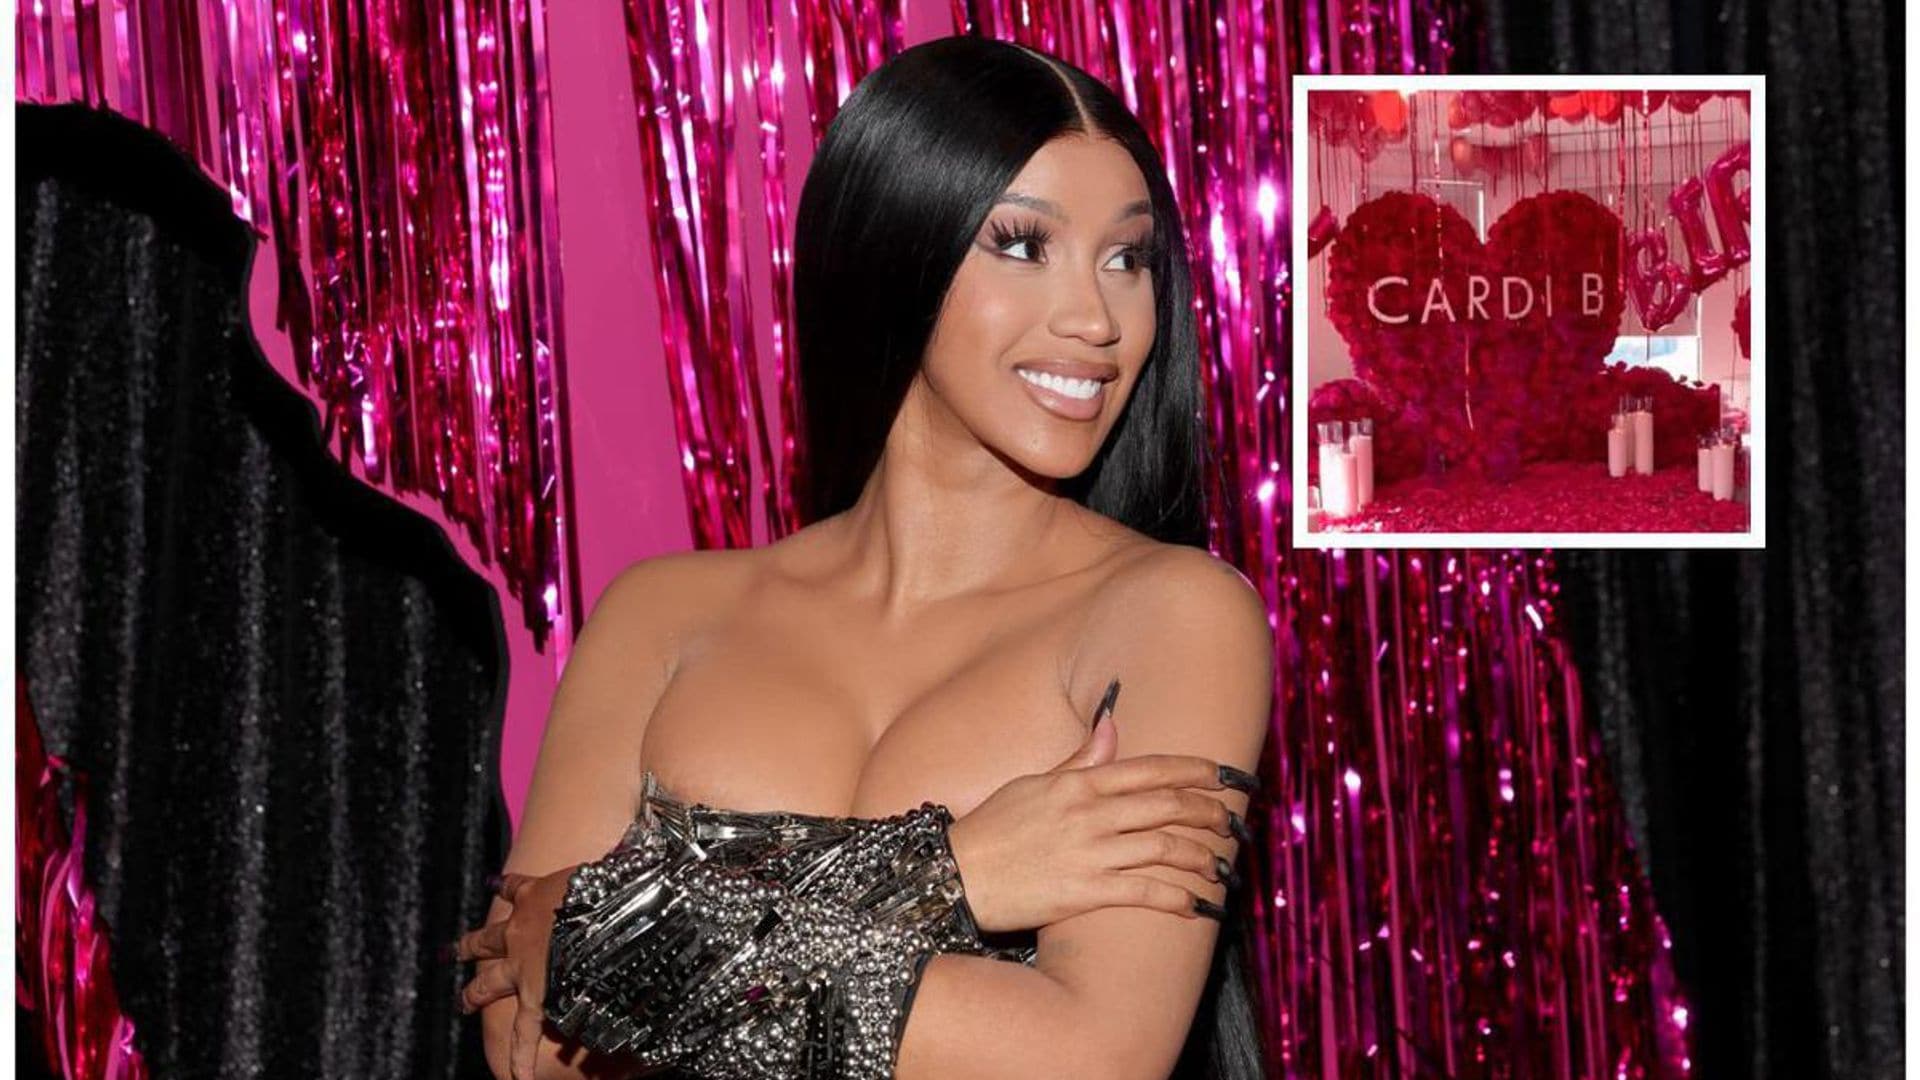 Cardi B receives an extravagant and romantic surprise on her 31st birthday from her husband, Offset